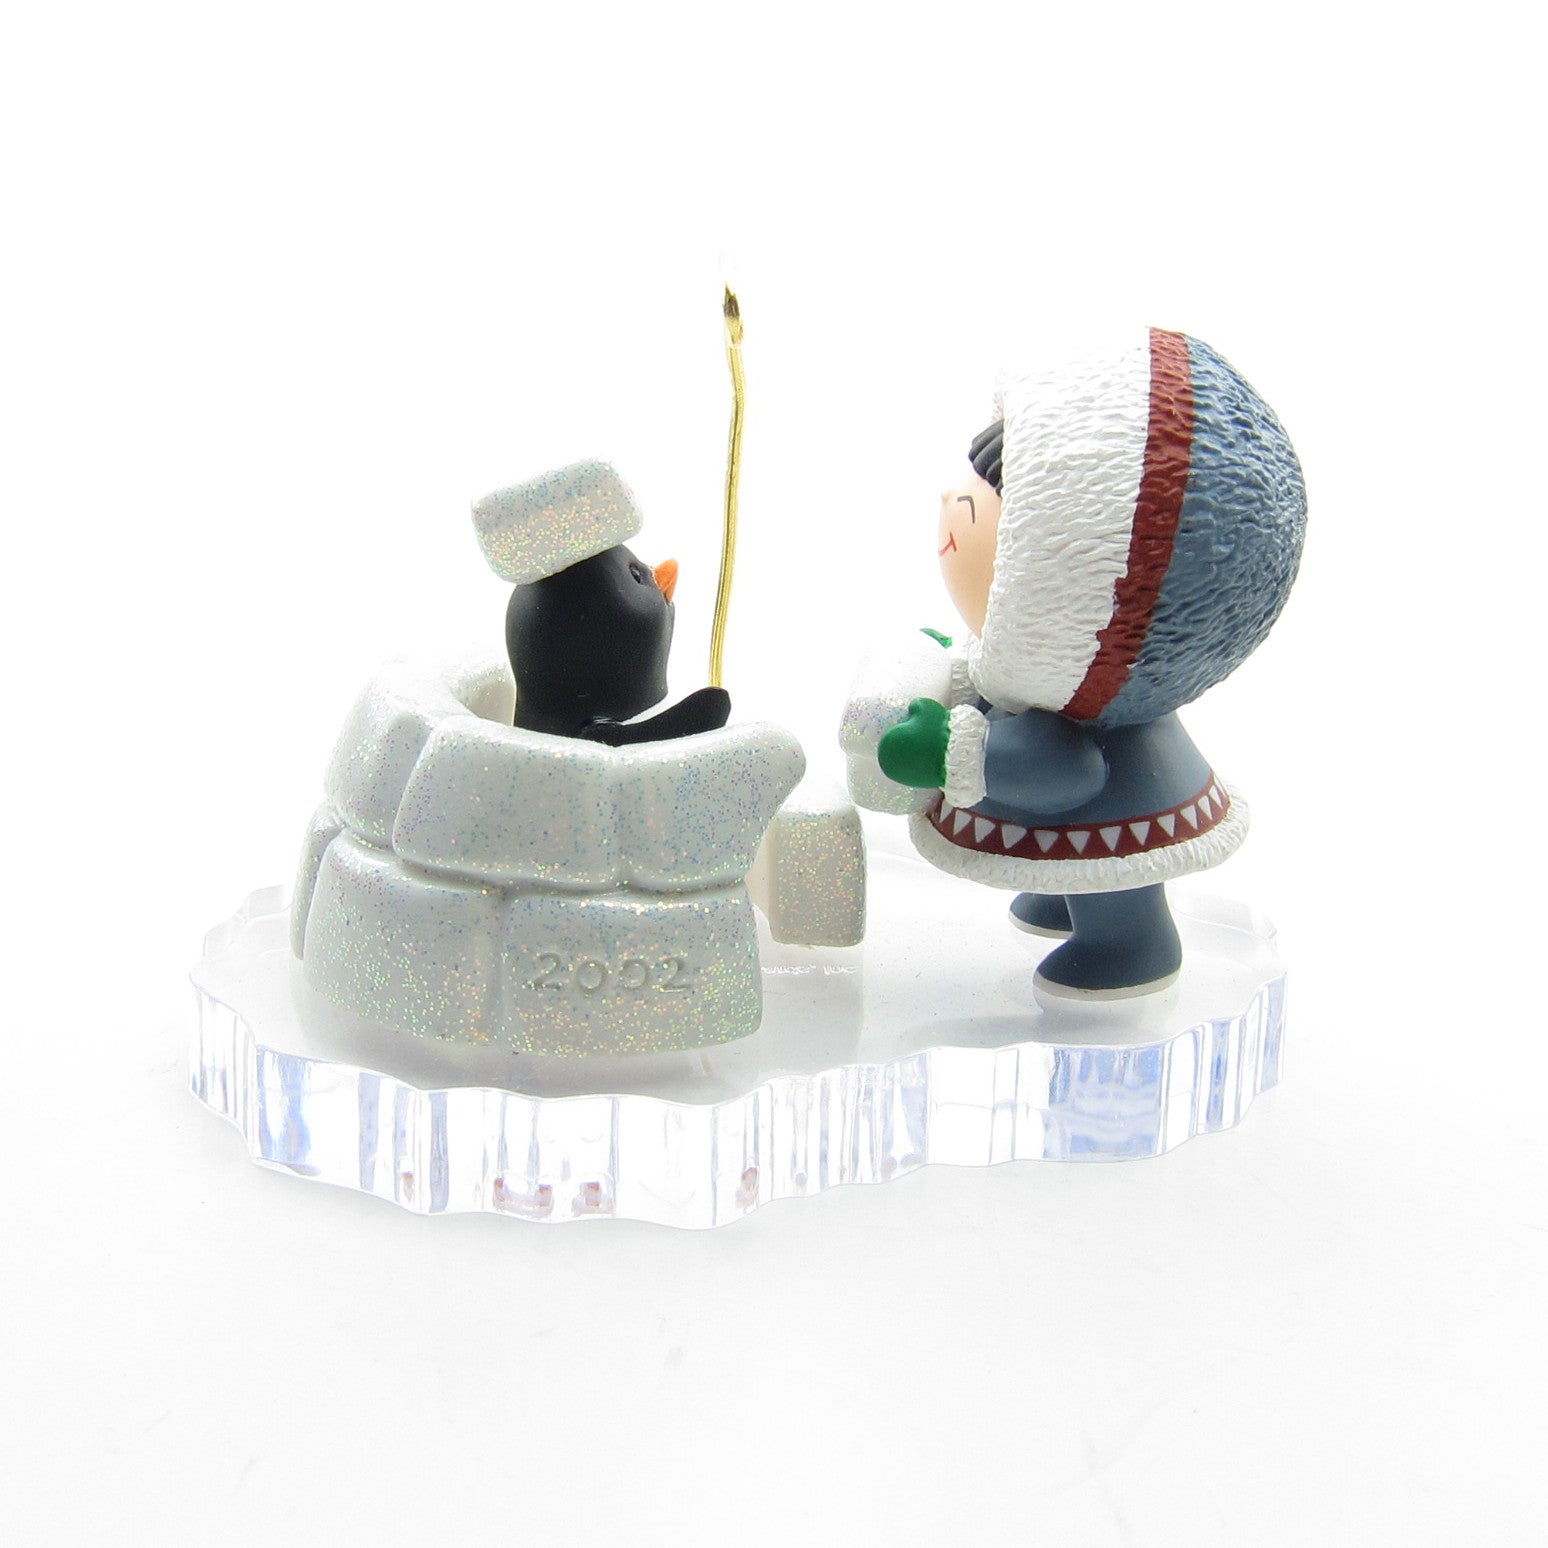 Frosty Friends ornament 23 penguin and child building igloo with ice blocks